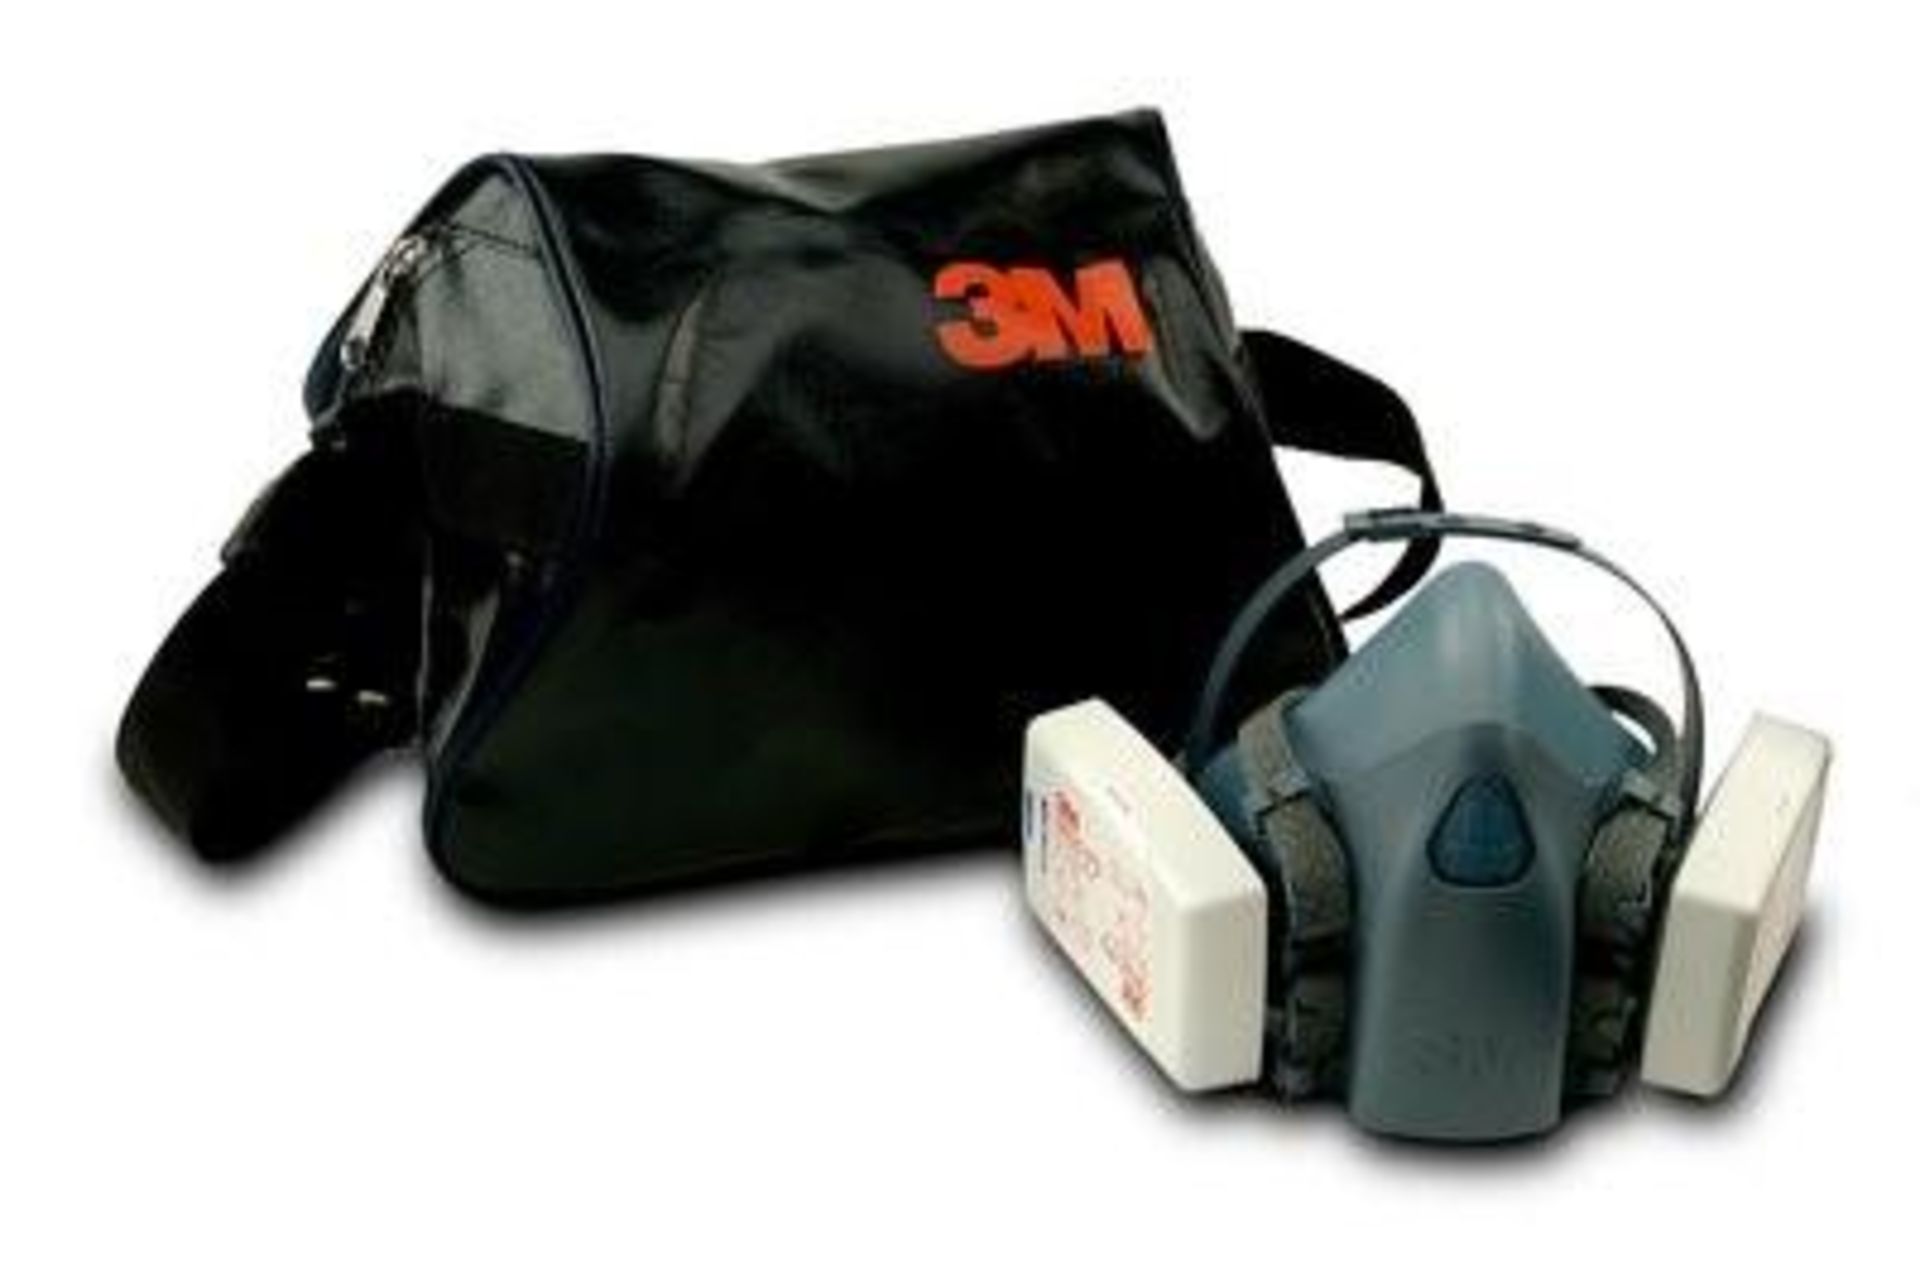 11 x 3M Respirator Carry Case Half Masks Only - CL185 - Ref: 56084/P30 - New Stock - Location: Stoke